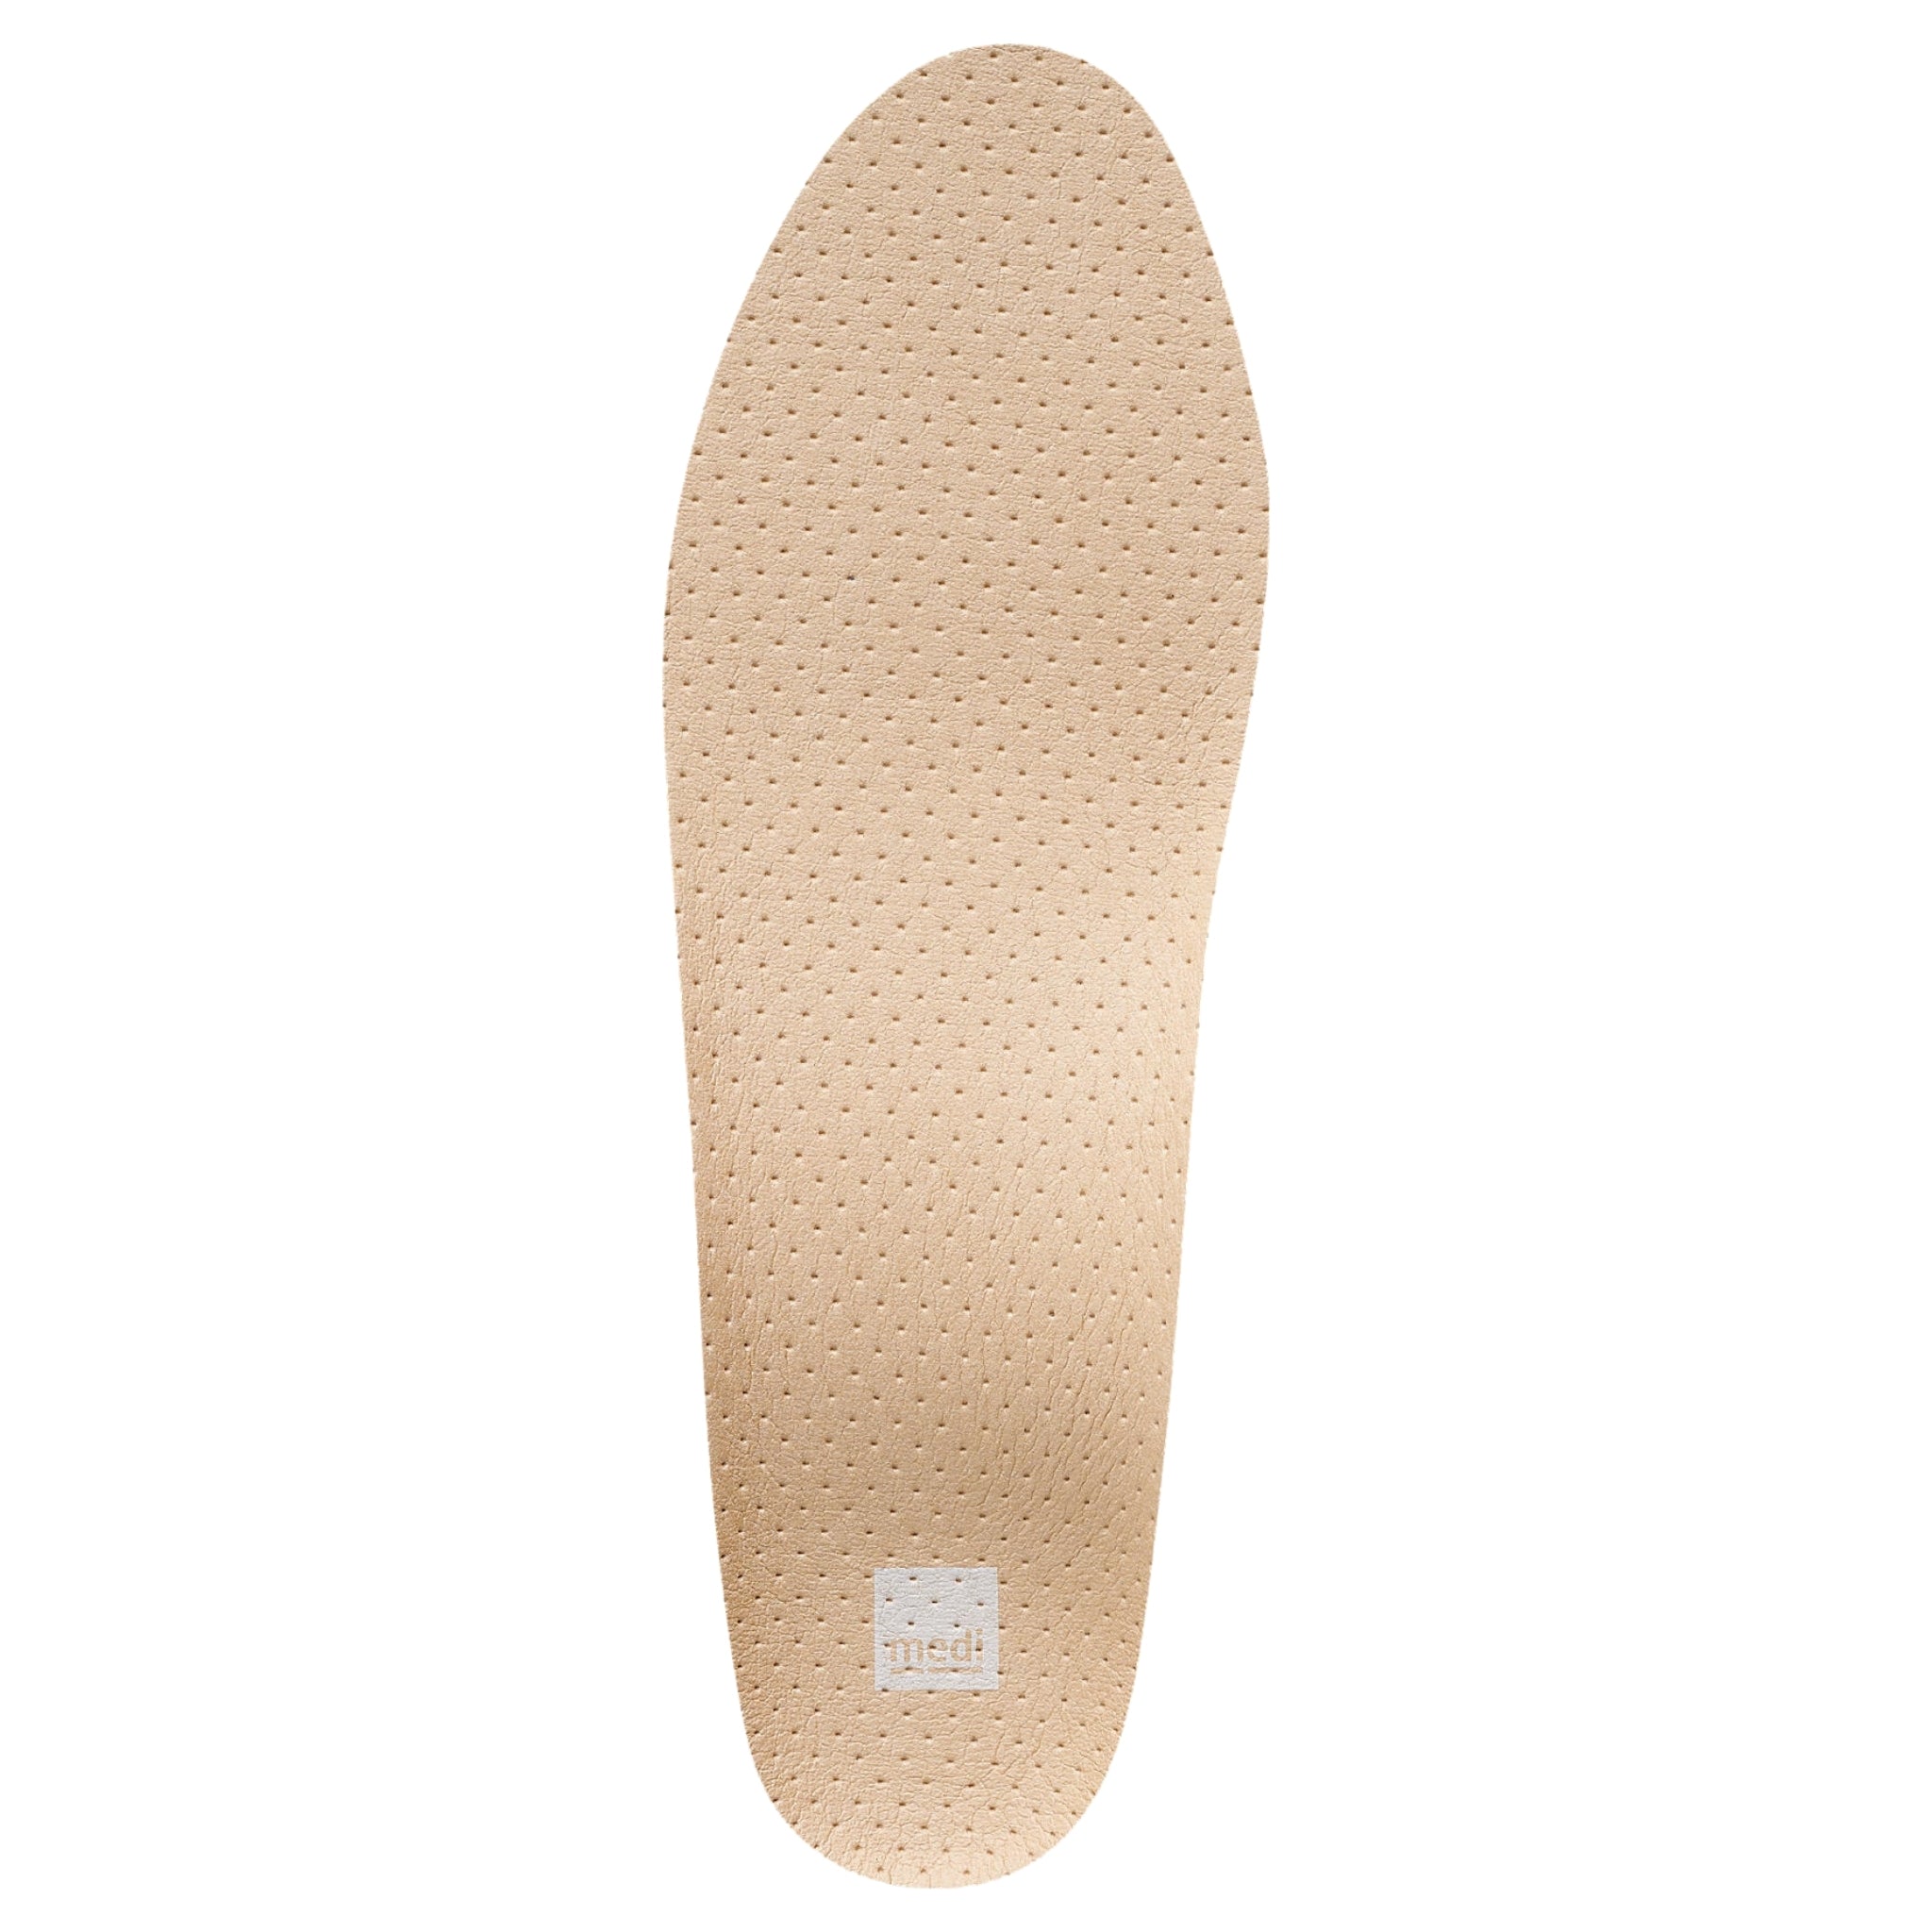 Foot Support Business Slim | Orthotic Insoles for Dress Shoes | Narrow Footware